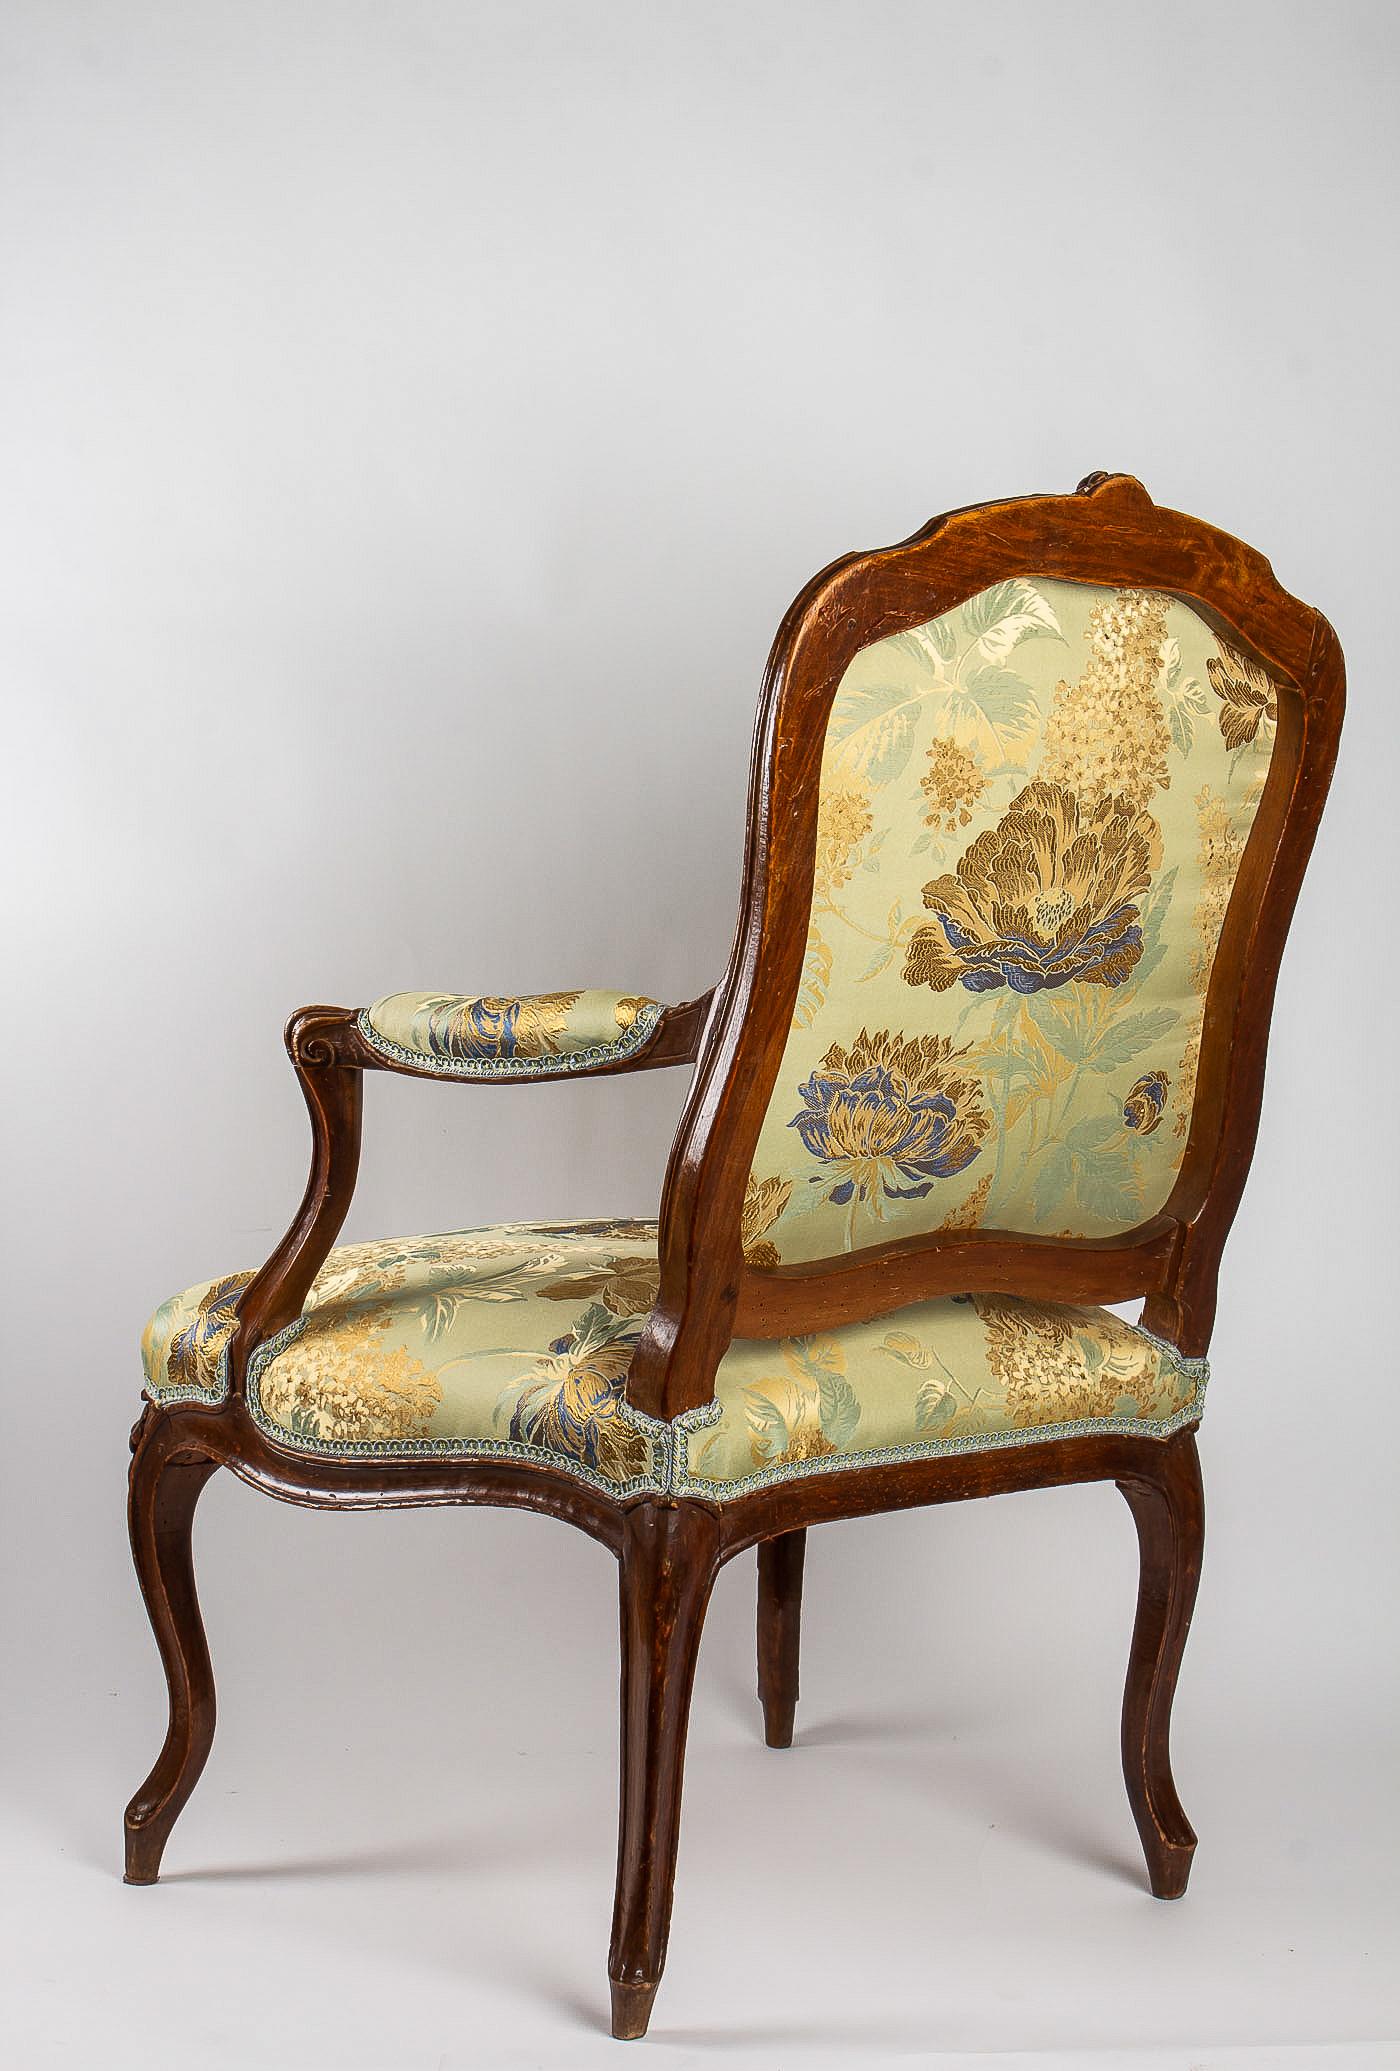 Louis XV Period Set of 4 of Large Armchairs, circa 1766-1770 by Louis Delanois For Sale 5